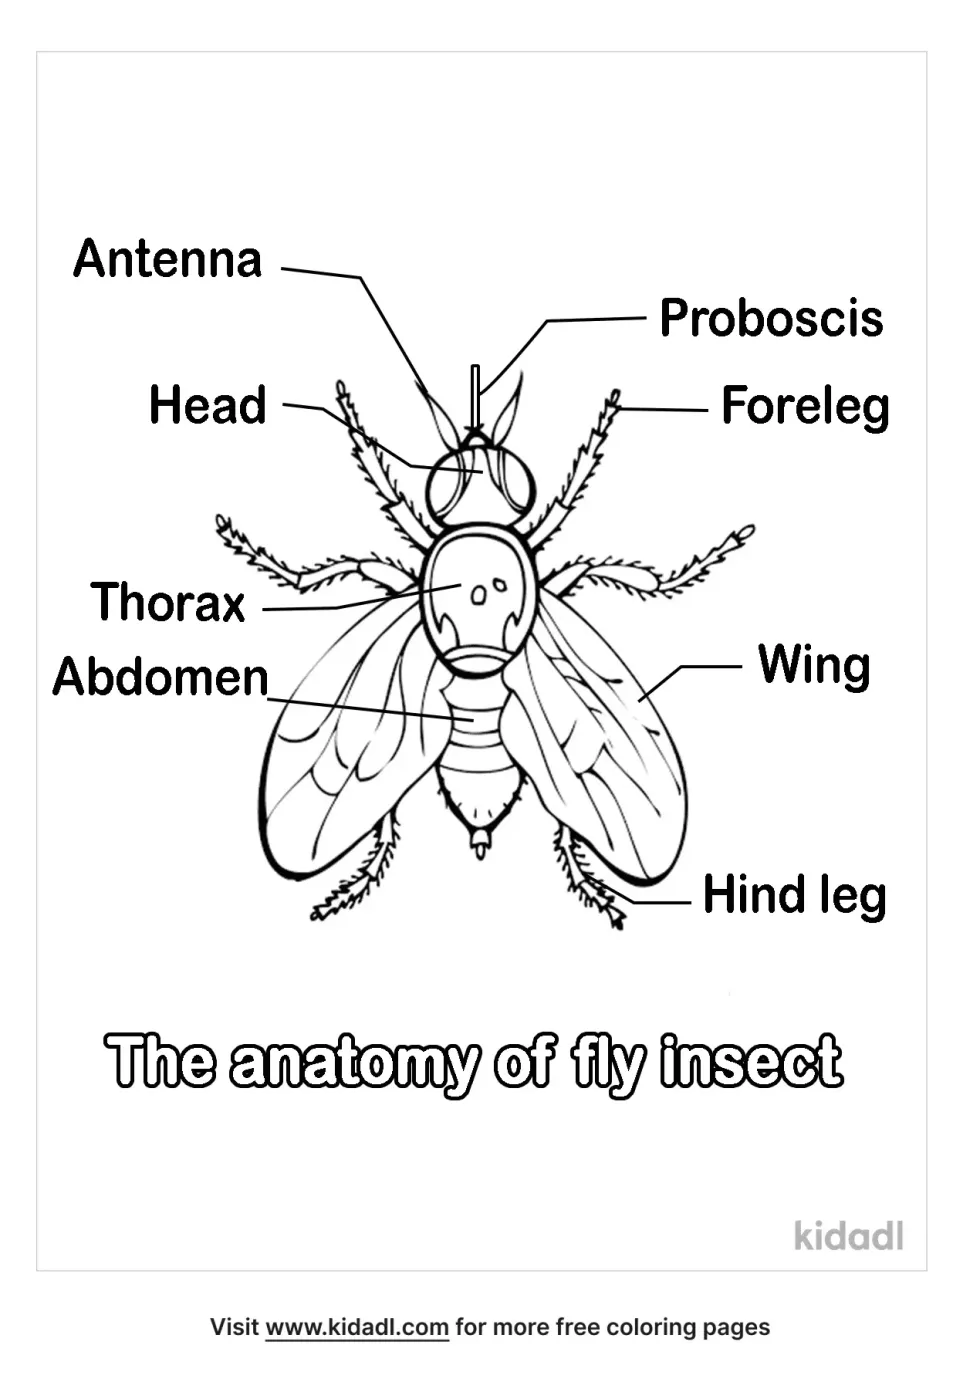 The Anatomy Of Fly Insect